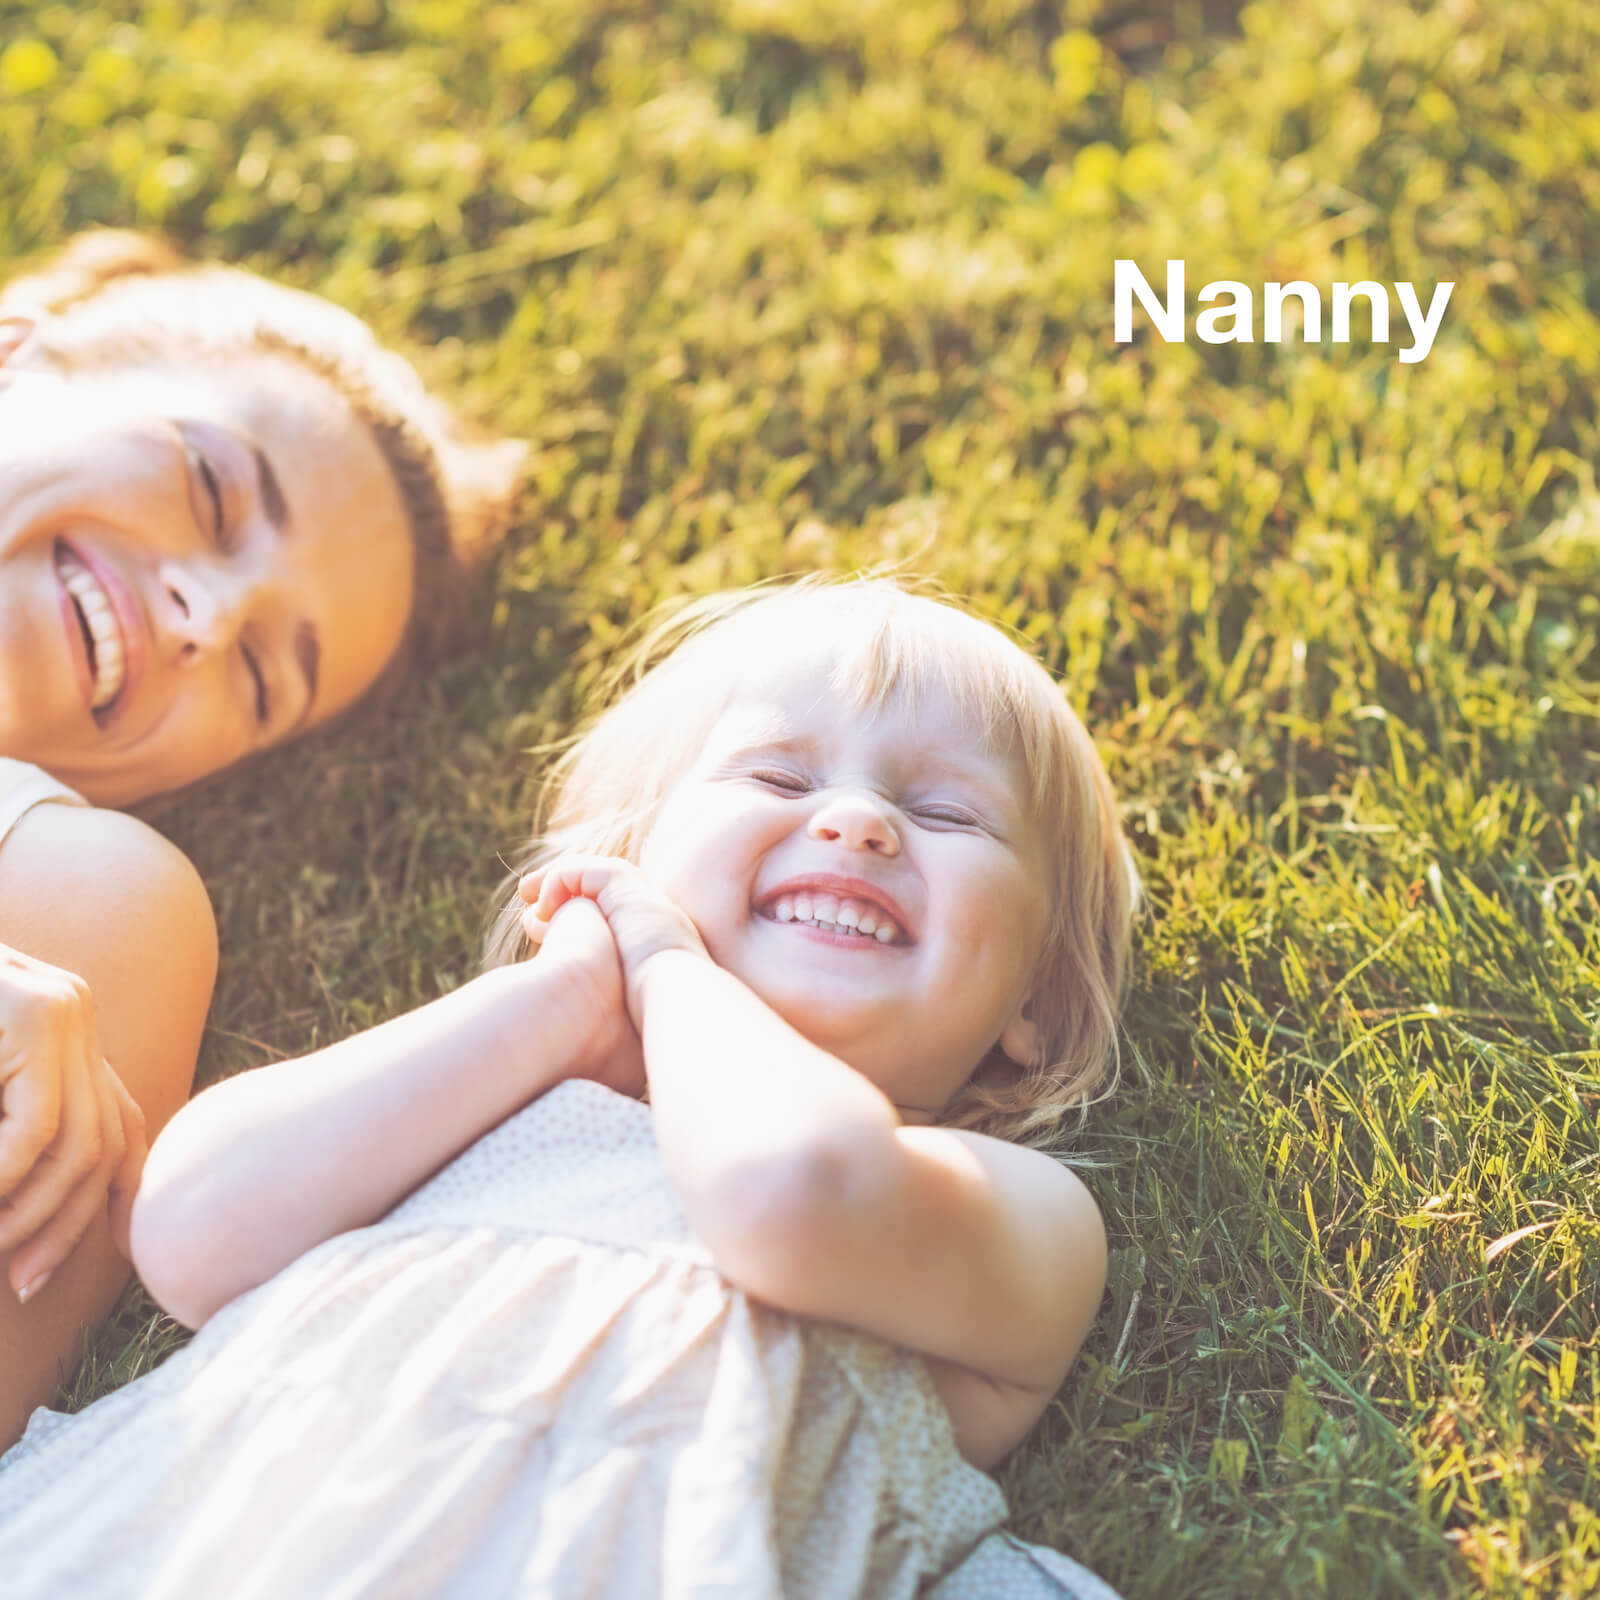 qualified nannies, governesses and educators for private households